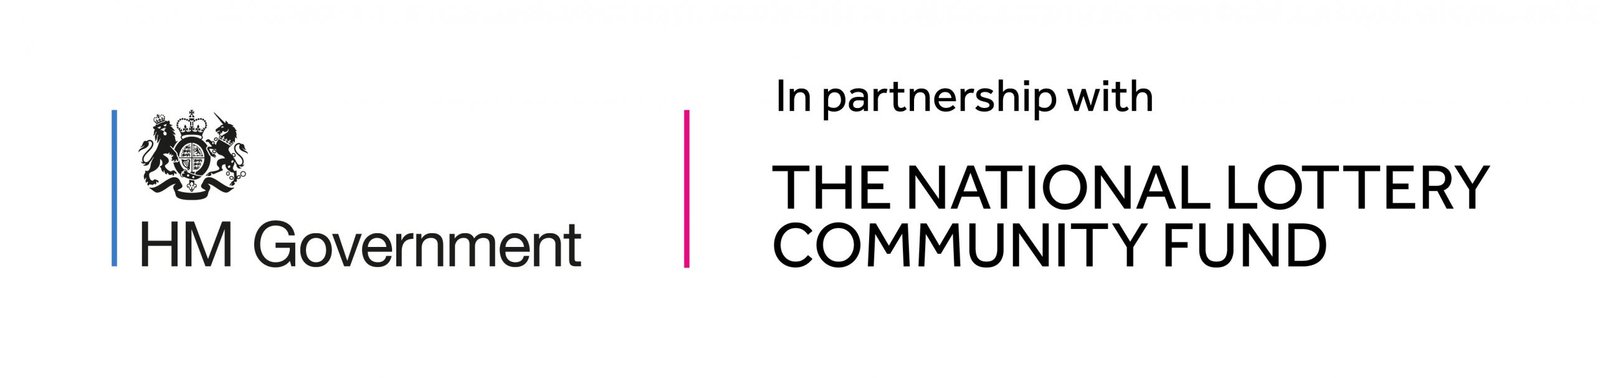 HM Government in partnership with The National Lottery Community Fund Logo